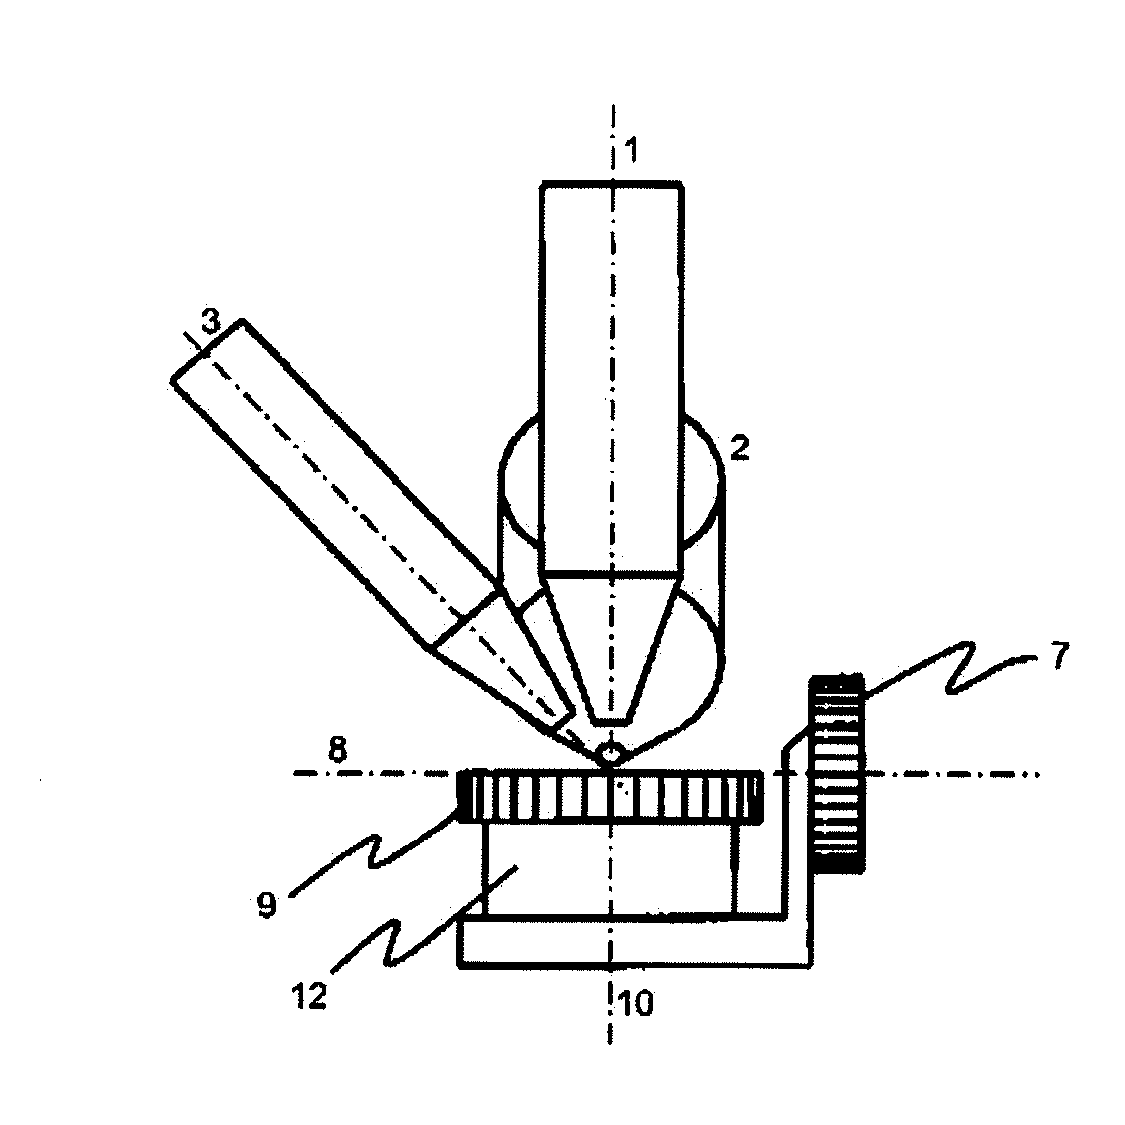 Composite charged-particle beam system